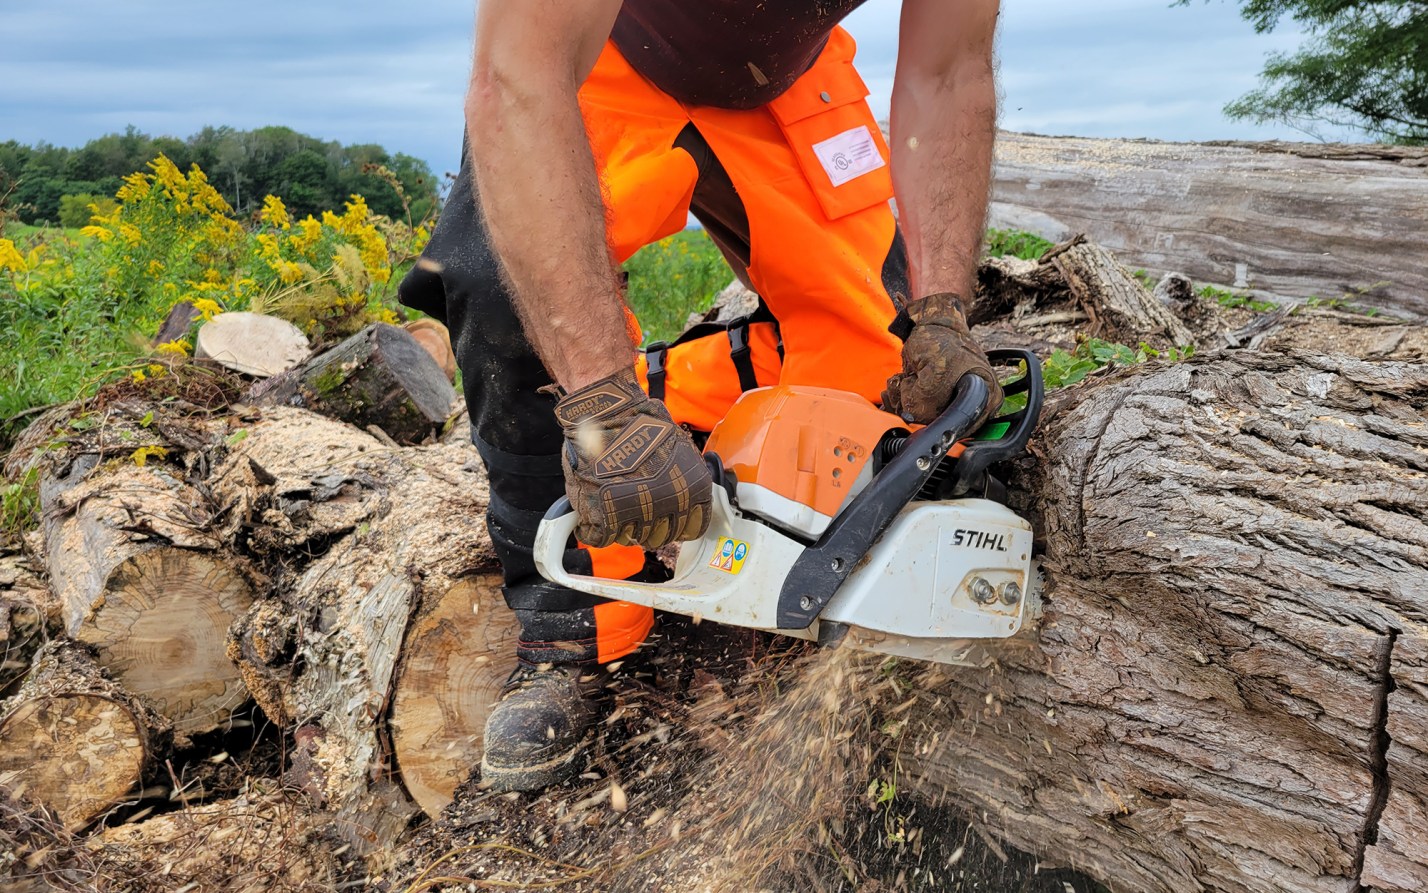 We tested the best chainsaw chaps.